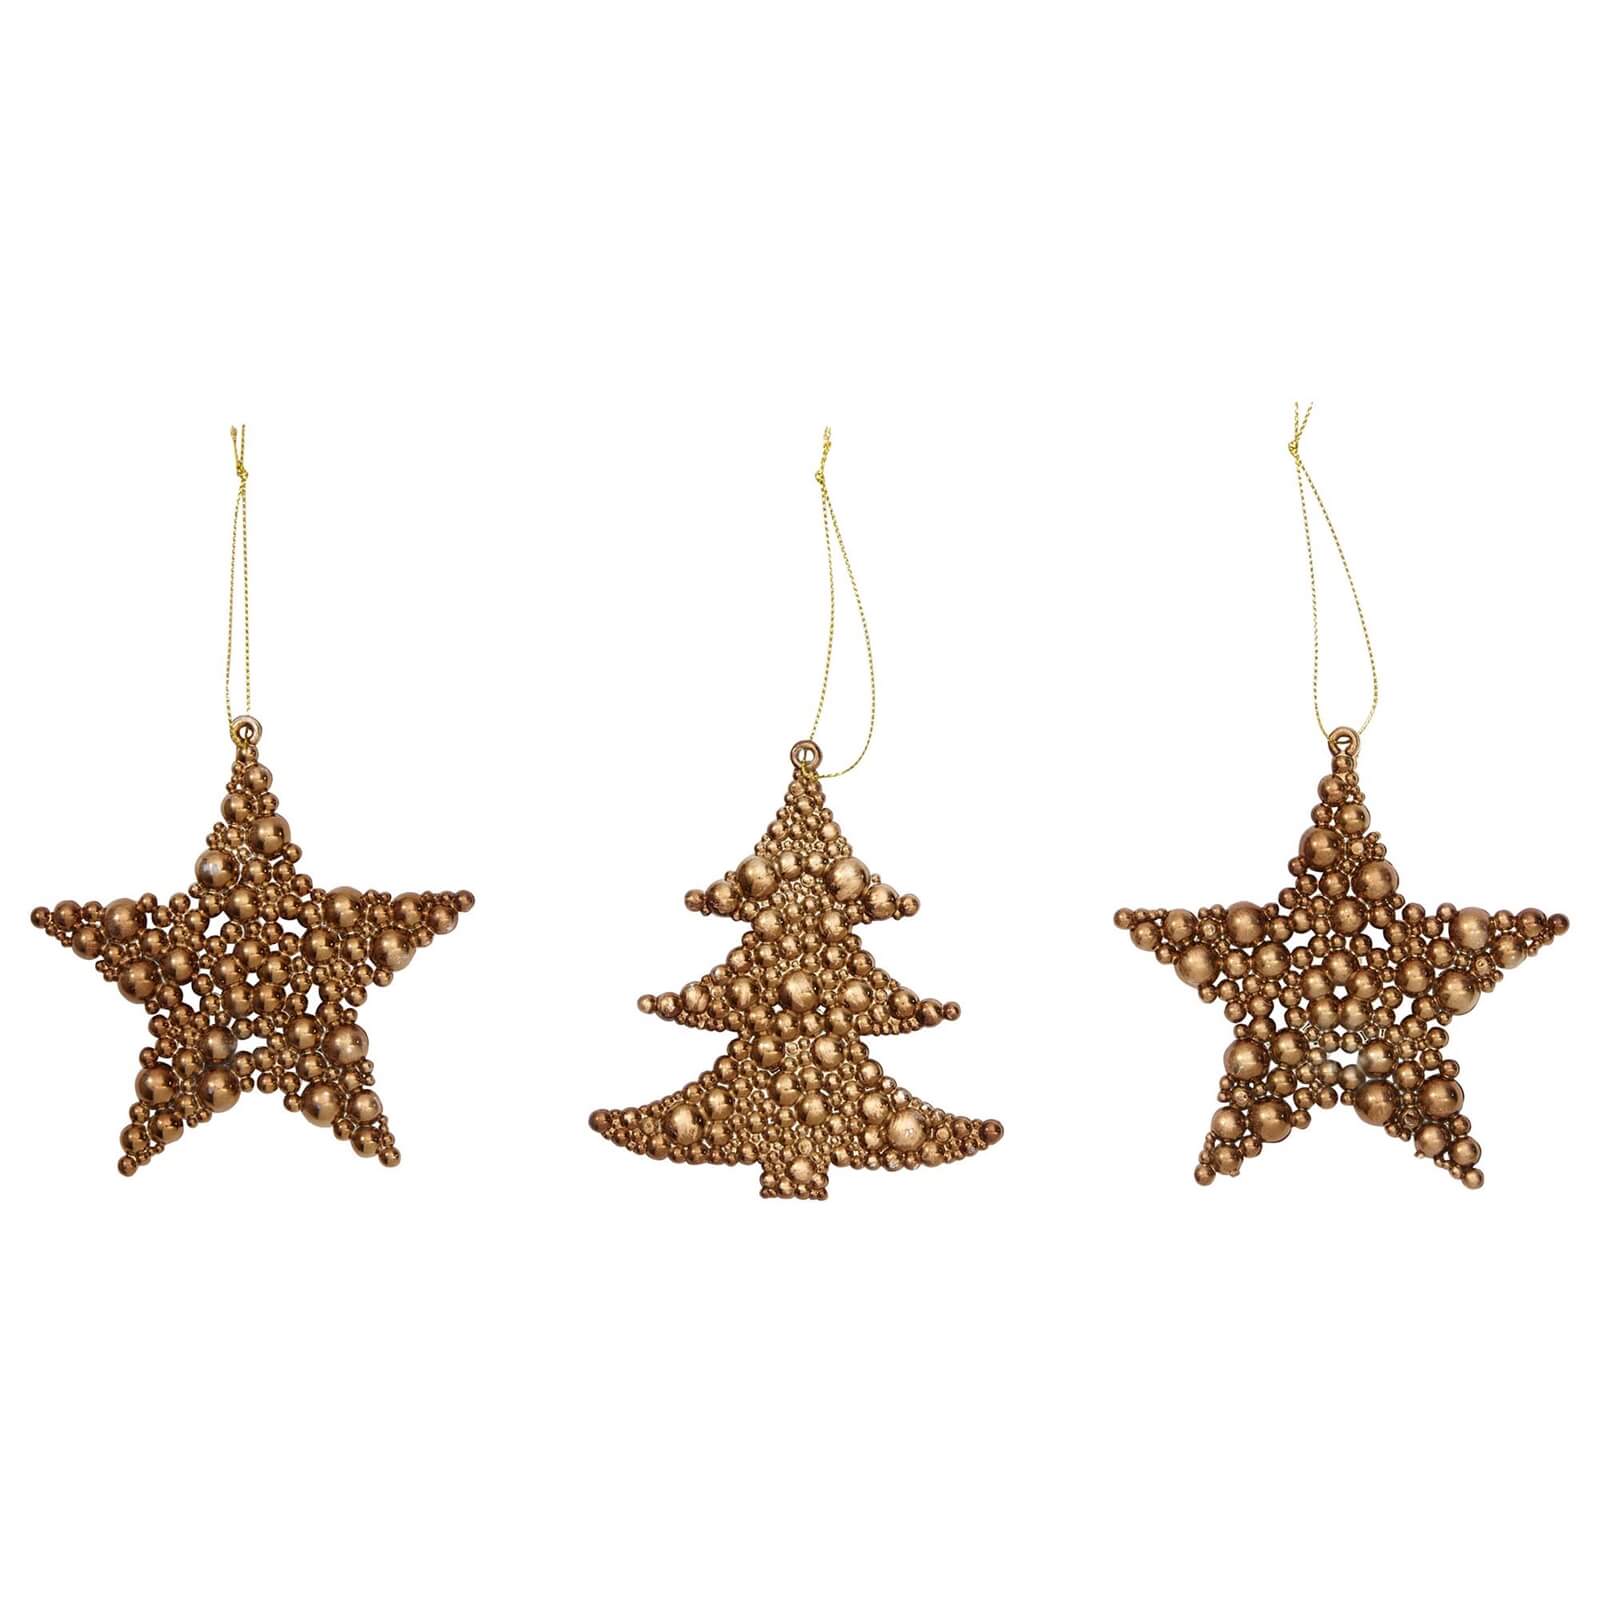 Gold Metal Christmas Tree & Star Christmas Tree Decorations - Pack of 9